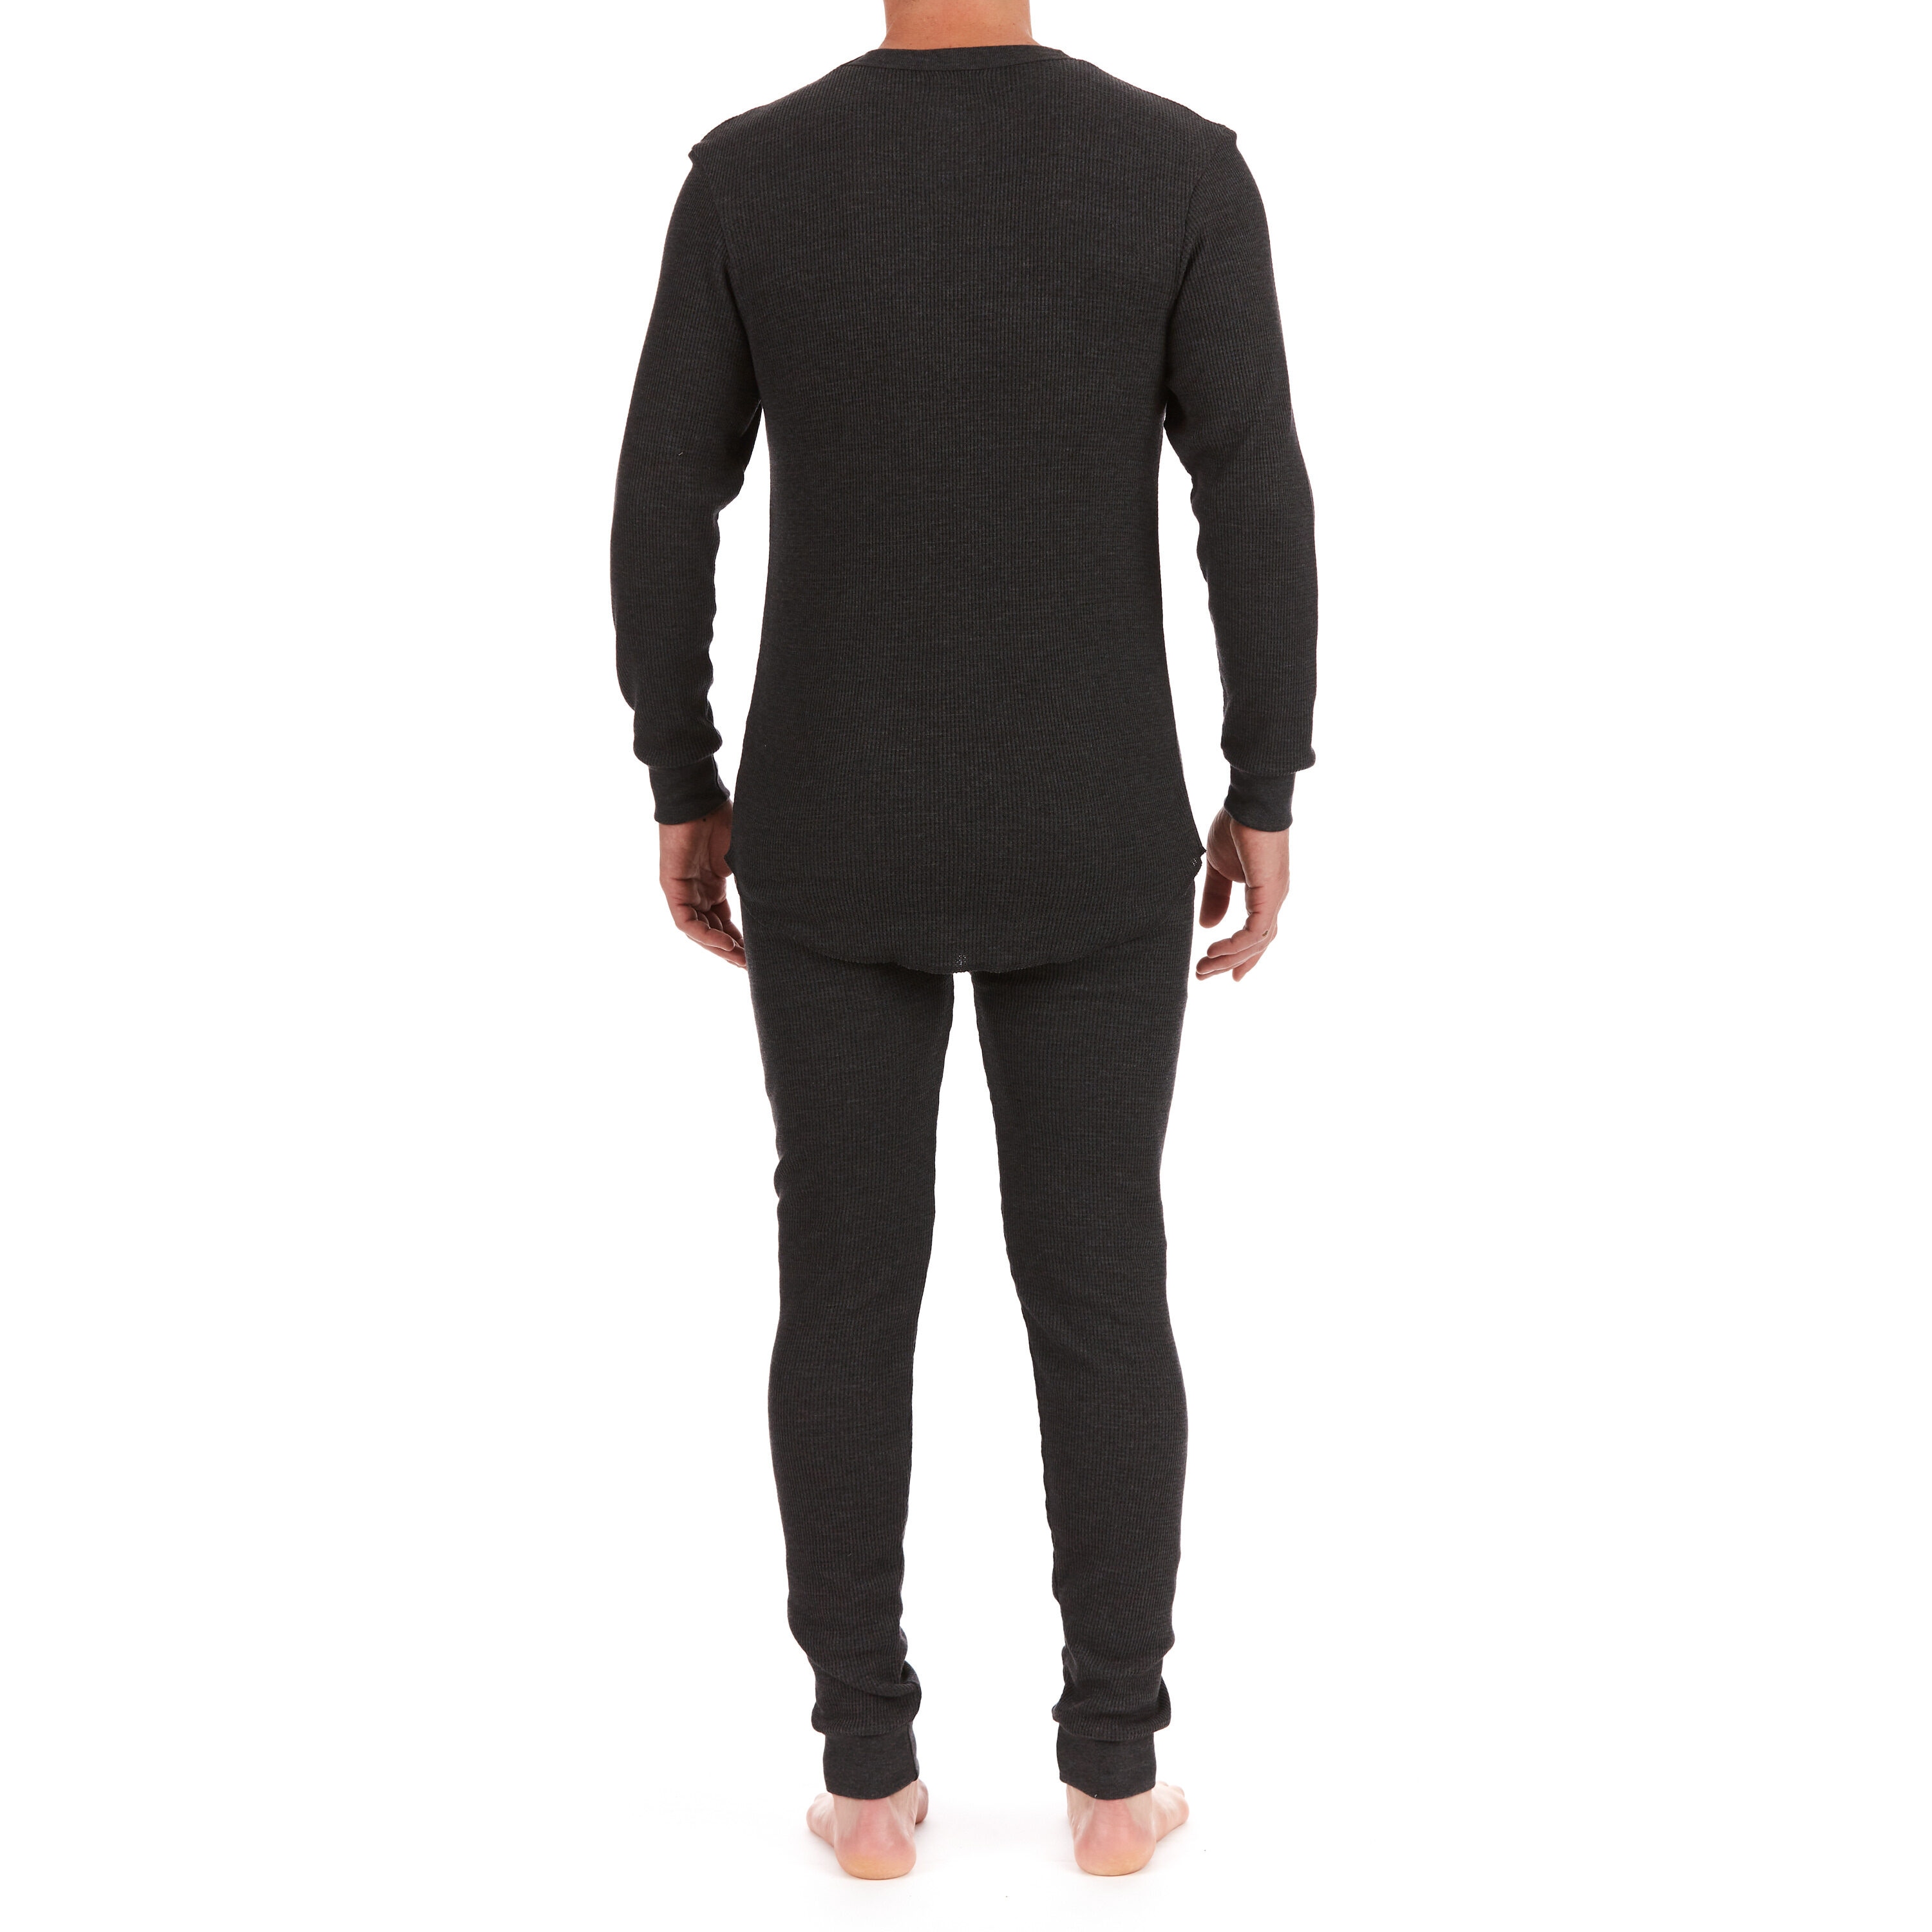 Wholesale military long underwear For Intimate Warmth And Comfort 